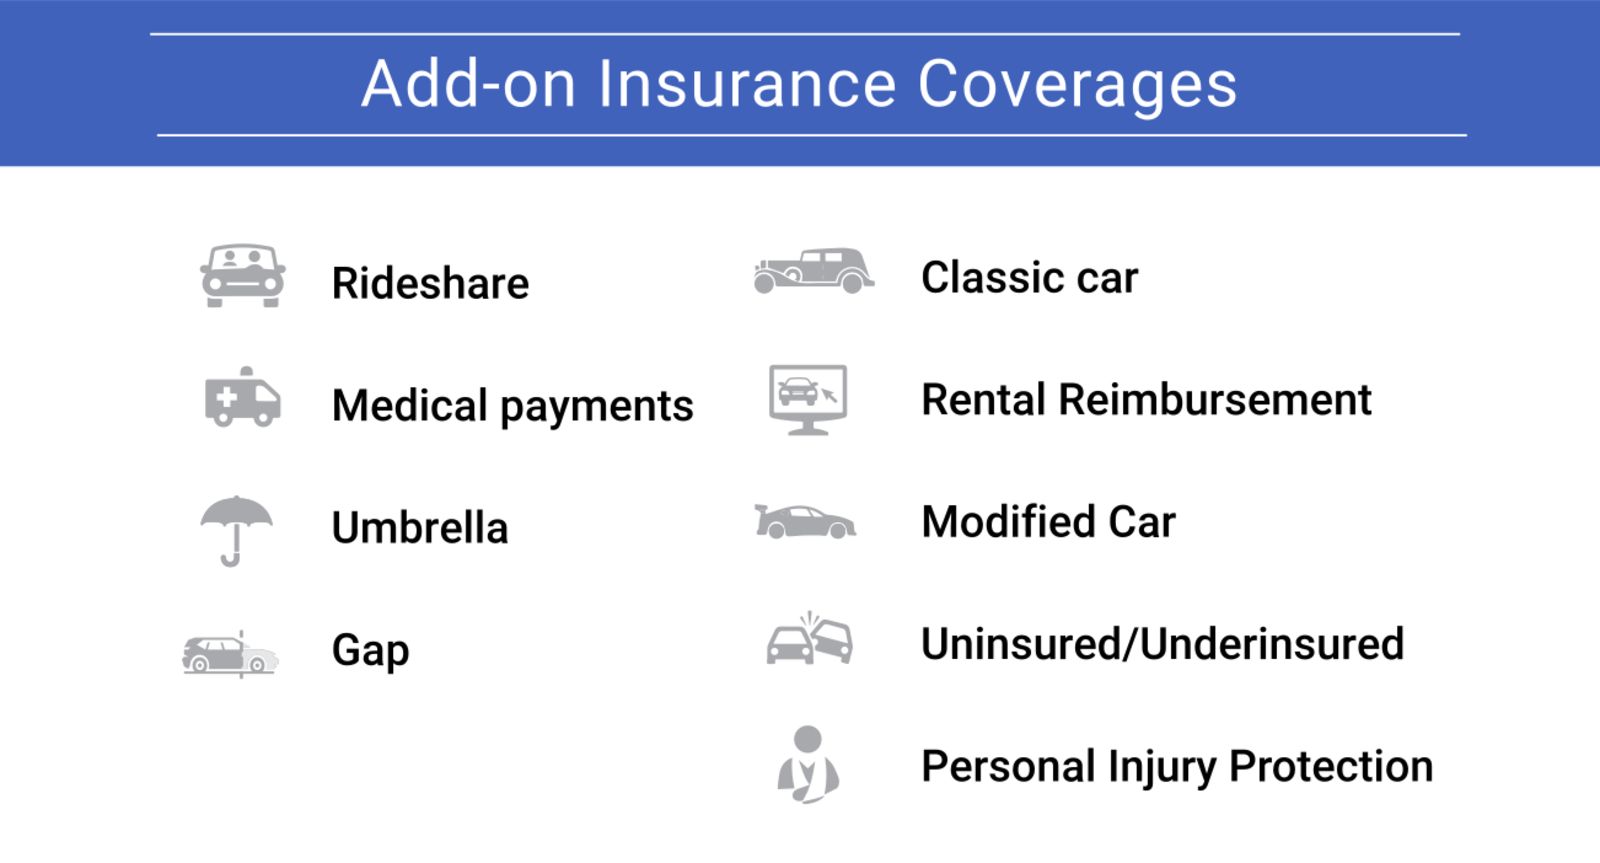 Add-on Insurance Coverages